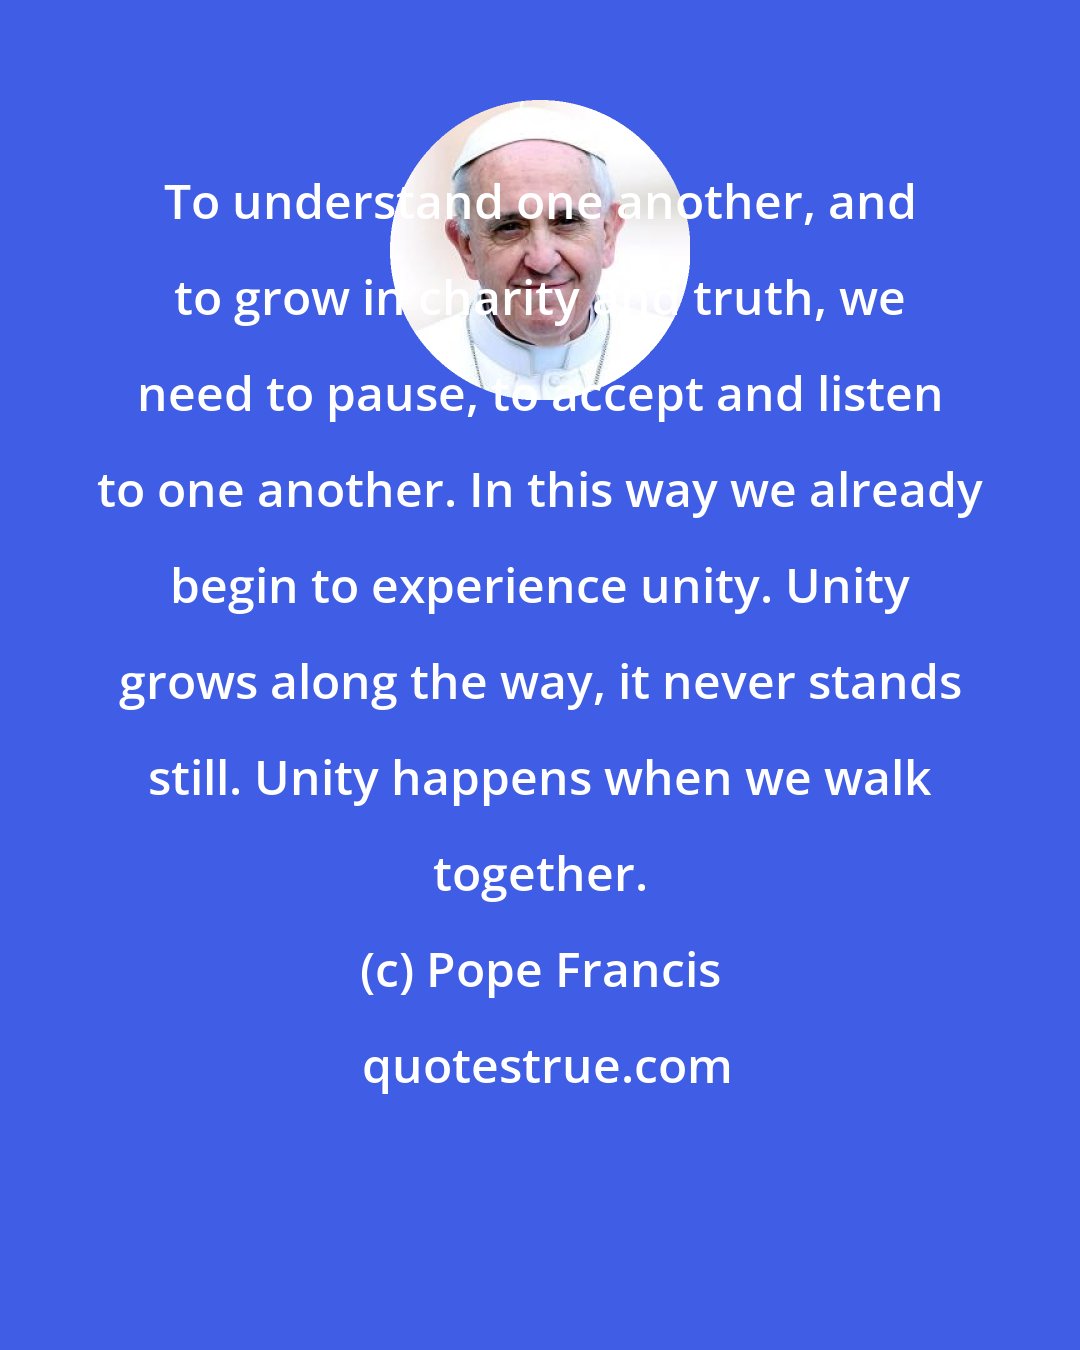 Pope Francis: To understand one another, and to grow in charity and truth, we need to pause, to accept and listen to one another. In this way we already begin to experience unity. Unity grows along the way, it never stands still. Unity happens when we walk together.